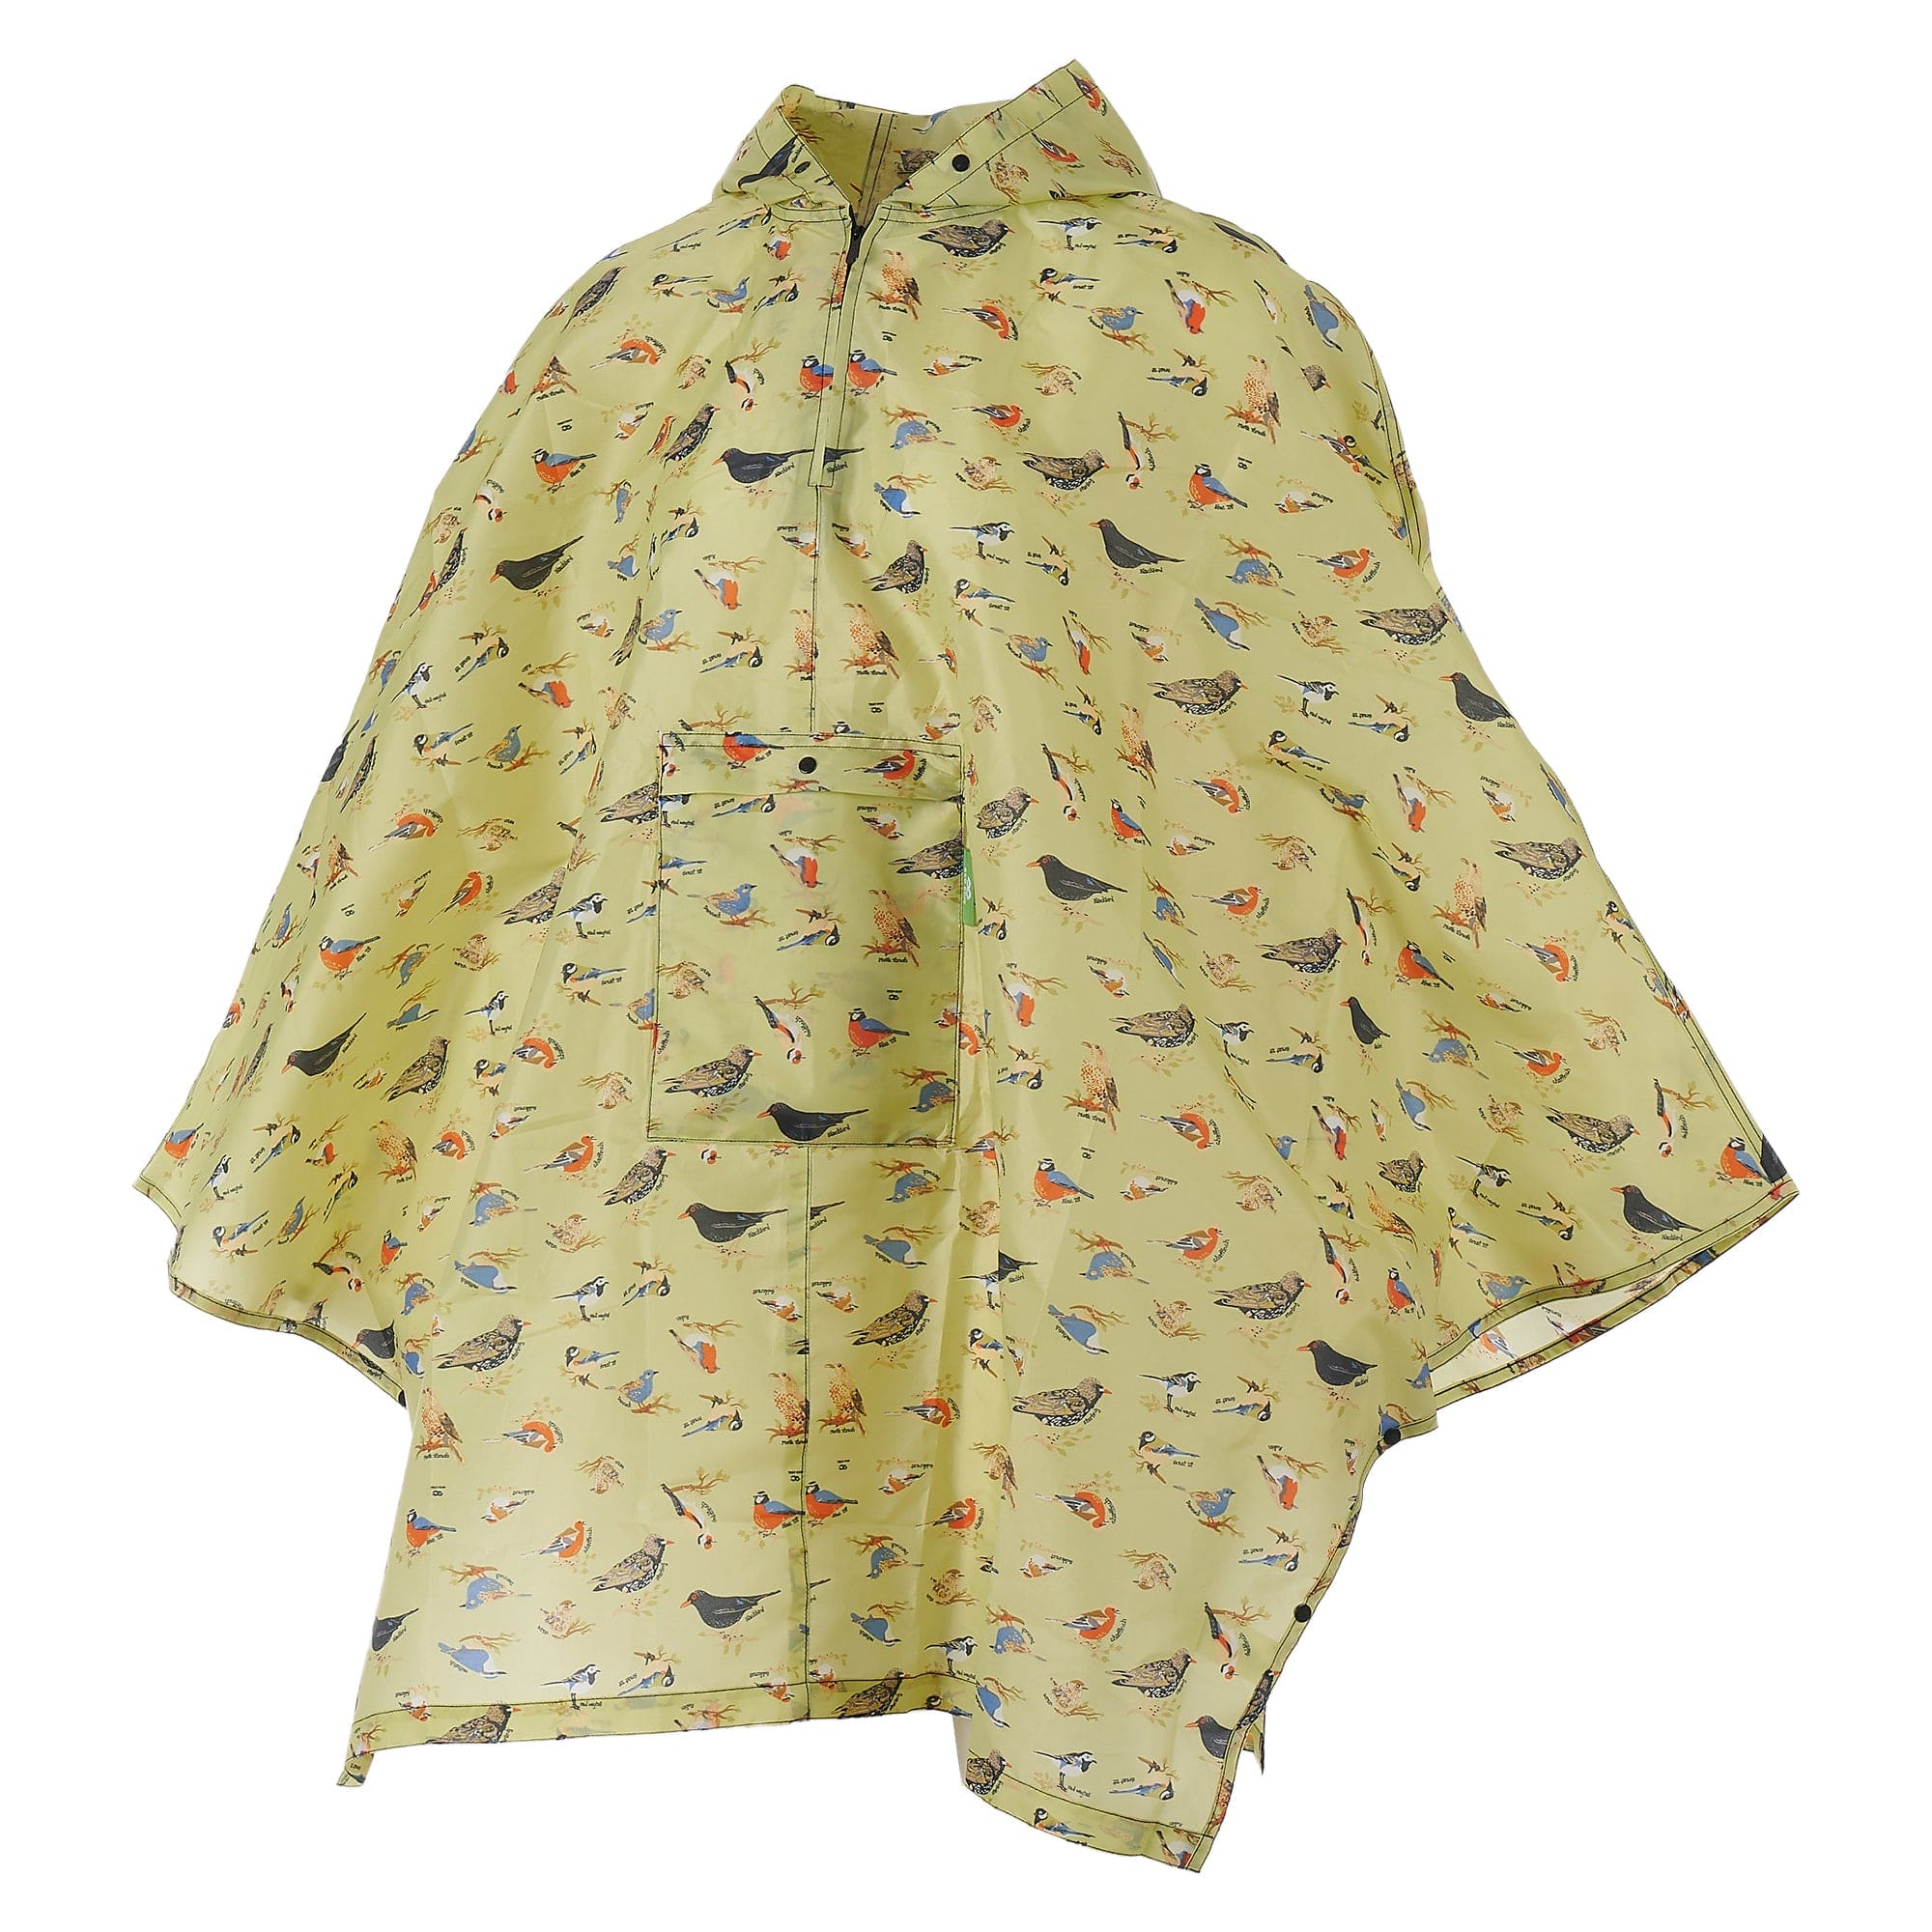 Eco Chic Eco Chic Waterproof Foldable Adult Poncho Wild Birds